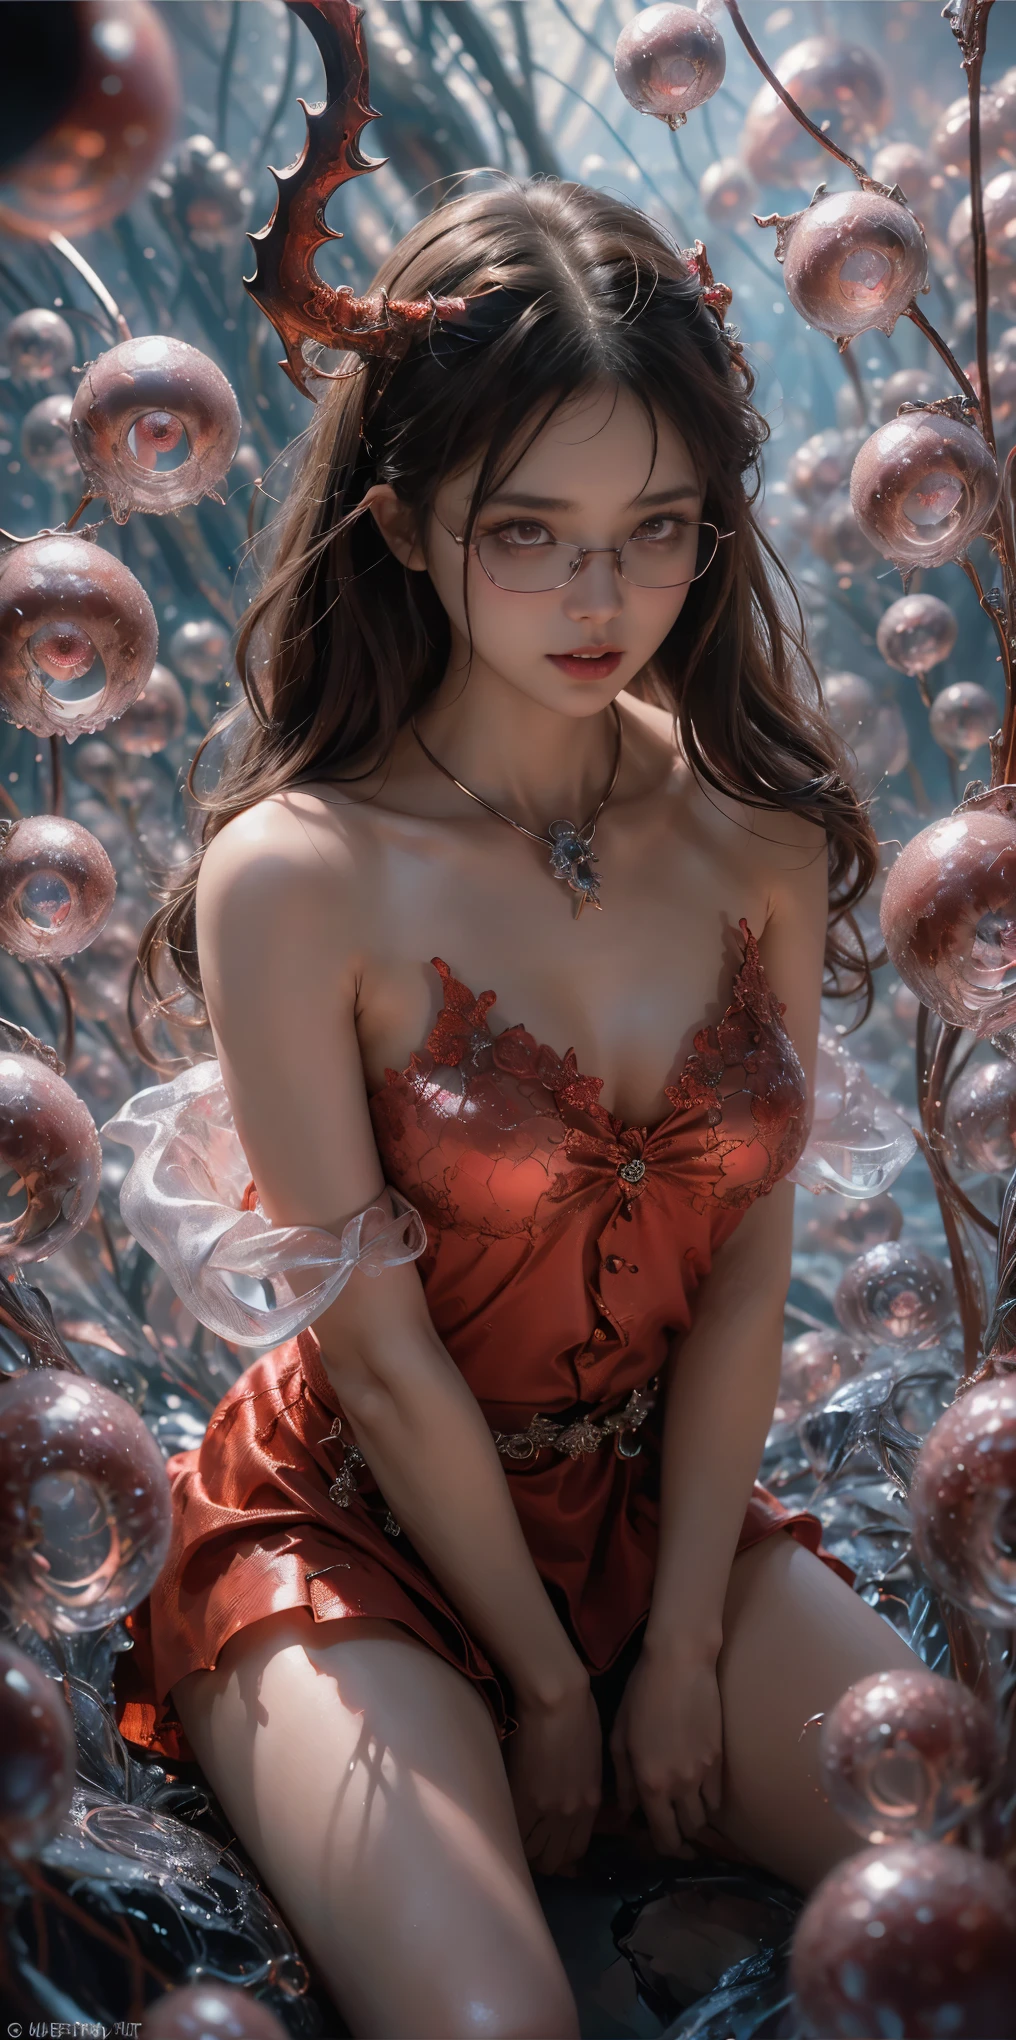 (The best illustrations)、realisitic、ultra-detailliert、The best lighting、Best Shadows、alluring succubus, ethereal beauty, perched on a cloud, (fantasy illustration:1.3), enchanting gaze, captivating pose, delicate wings, otherworldly charm, mystical sky, (Luis Royo:1.2), (Yoshitaka Amano:1.1), Dungeon and Dragon、caves、Dungeon、 A Necromancer、natta、Dark style、Succubus、Devil's Daughter、Bat Wings，(((Demon Hornlack-rimmed round glasses))))、(red eyes glowing:1.6)、​beautiful countenance、Tindall Effect、(High Detail Skins:1.2) absurderes、Ponytail distortion、jewely、Beautiful expression、Toned waist、Wide buttocks、Tindall Effectmasuter piece、top-quality、Highest Standards、Top image quality、masutepiece、intricate detailes、High resolution、Depth Field、natural soft light、profetional lighting、Great smile、(High Detail Skin: 1.2)、photorealistic anime girl render、Strong highlights of the eyes、Perfect Anatomy、crotch open、Shy、Spreading your legs、Panties are visible、Skirt flipping、Body shiny with oilerectile nipple))、8K resolution、intricate clothing、Intricate details、Panties visible through the skirt、Panties in full view、Small panties, pink nipple, pink pussy